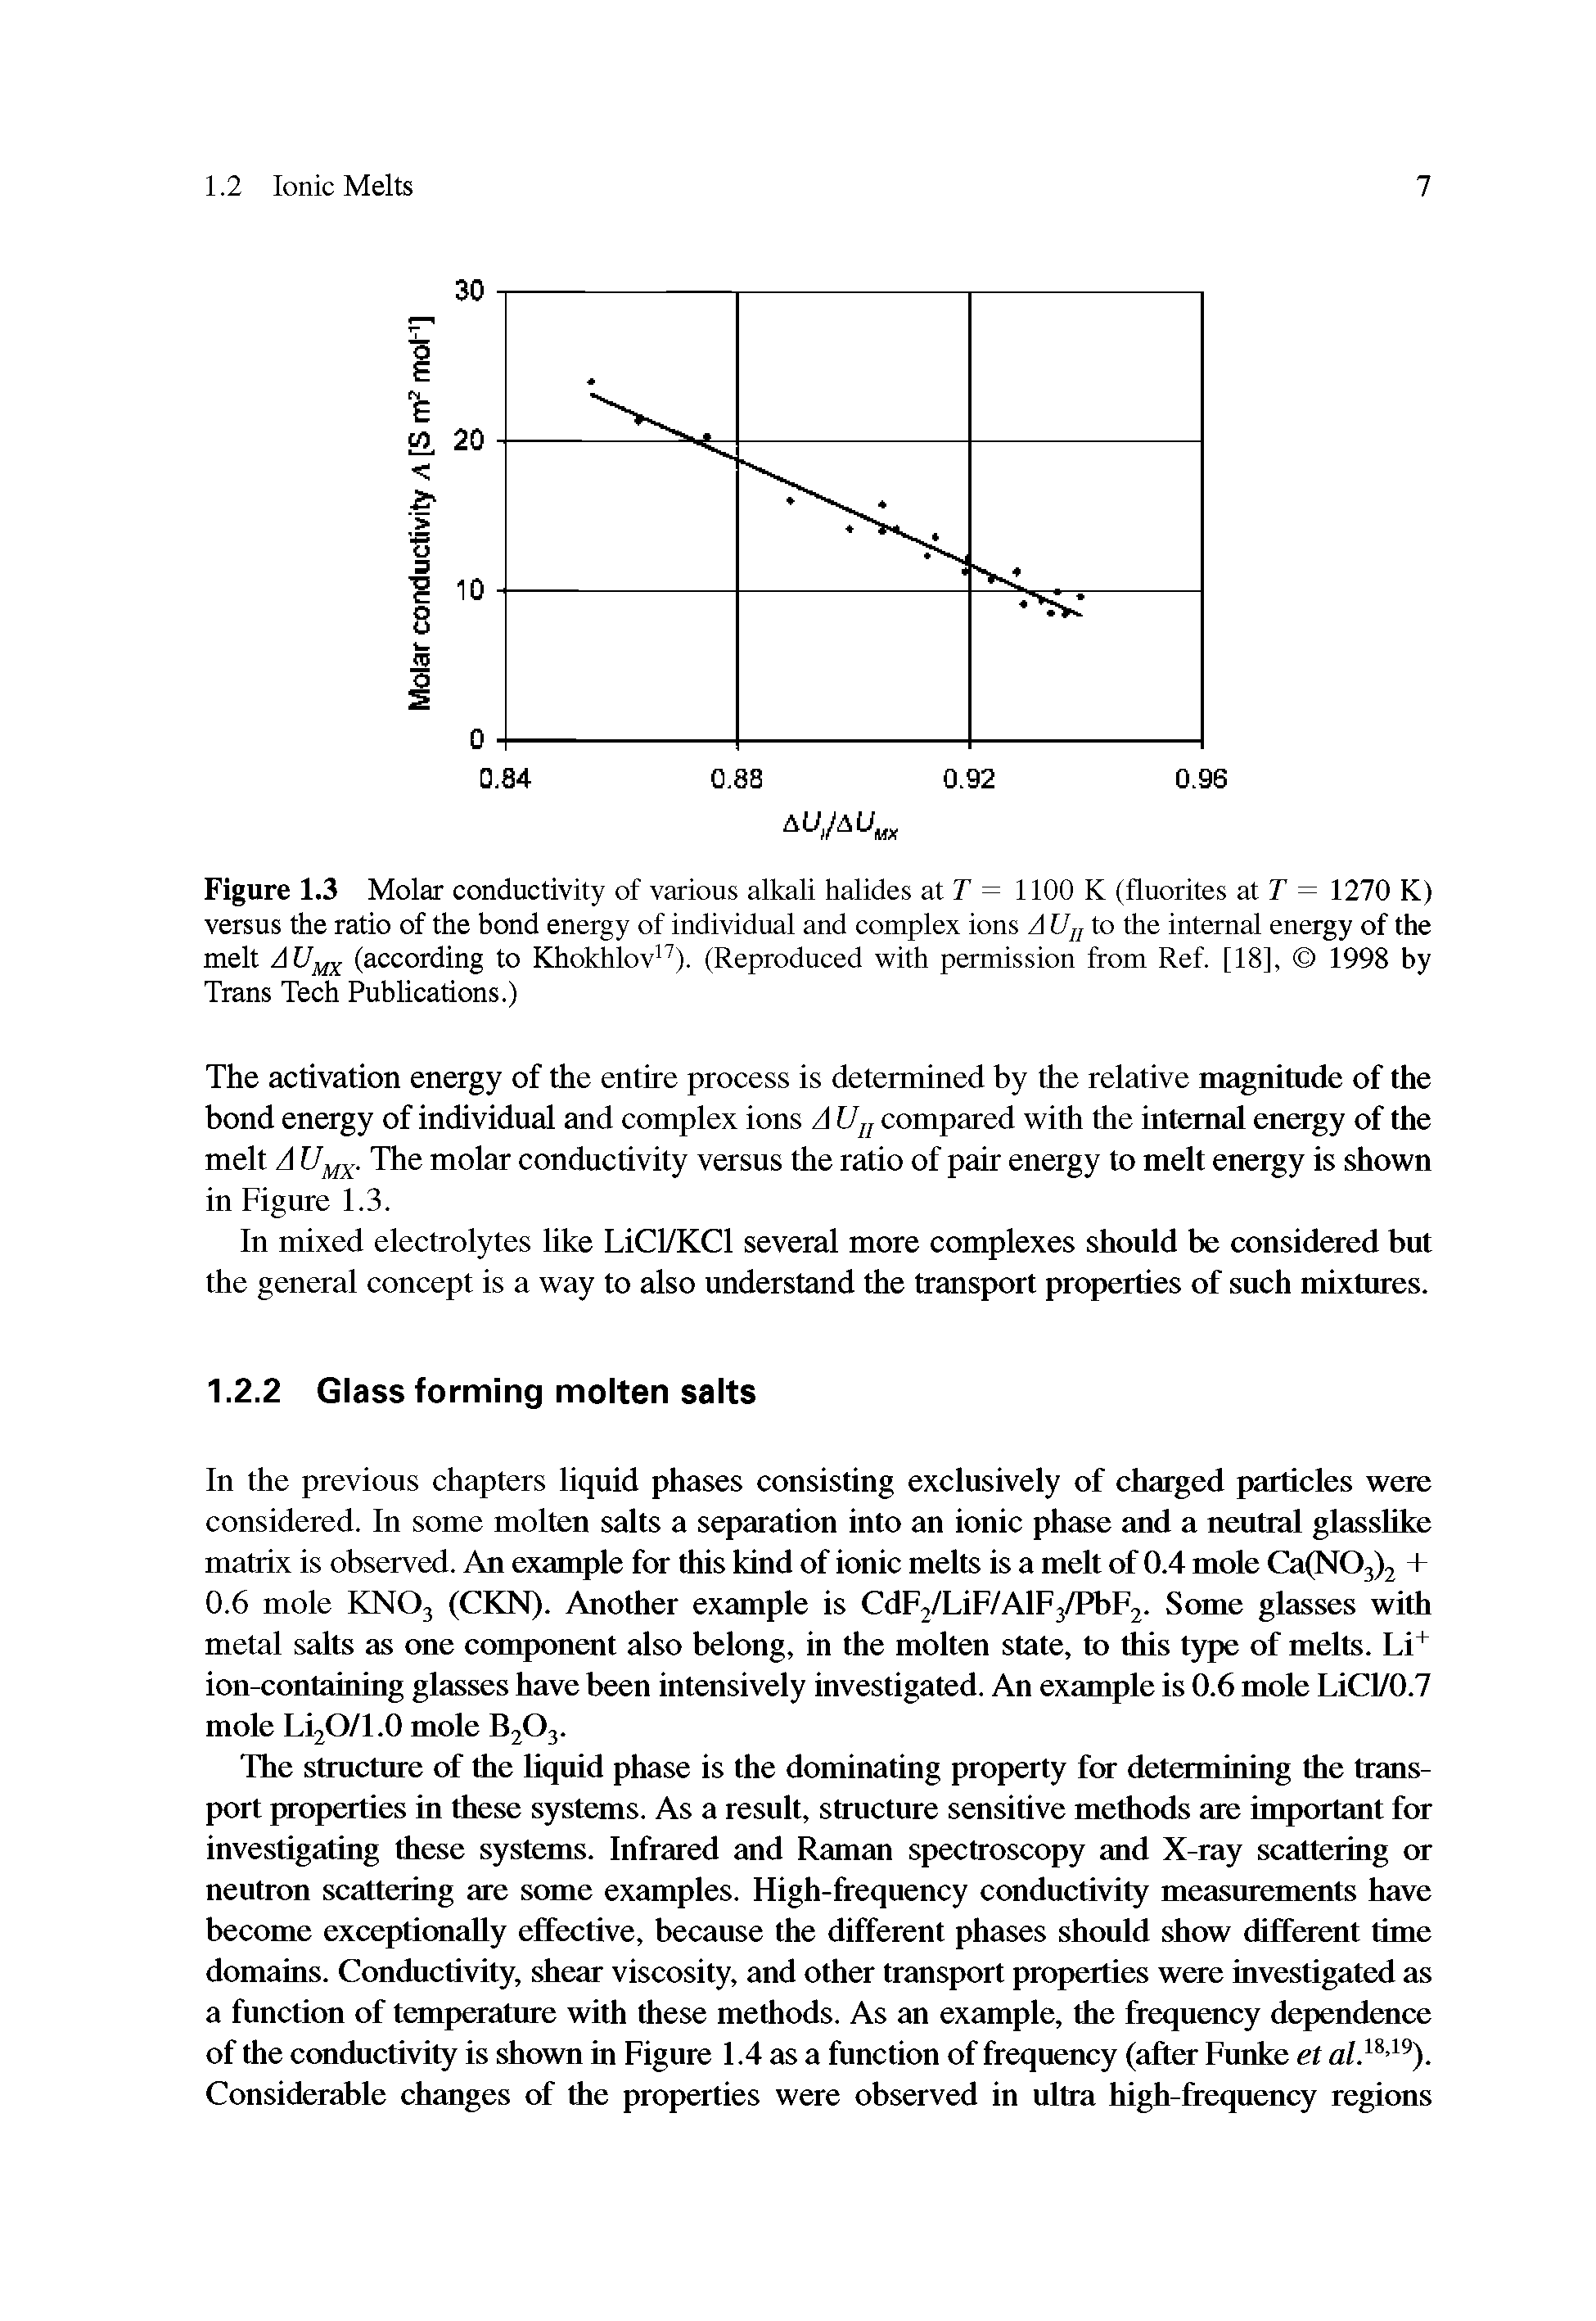 Figure 1.3 Molar conductivity of various alkali halides atT = 1100 K (fluorites atT = 1270 K) versus the ratio of the bond energy of individual and complex ions A U to the internal energy of the melt AU (according to Khokhlov ). (Reproduced with permission from Ref. [18], 1998 by Trans Tech Publications.)...